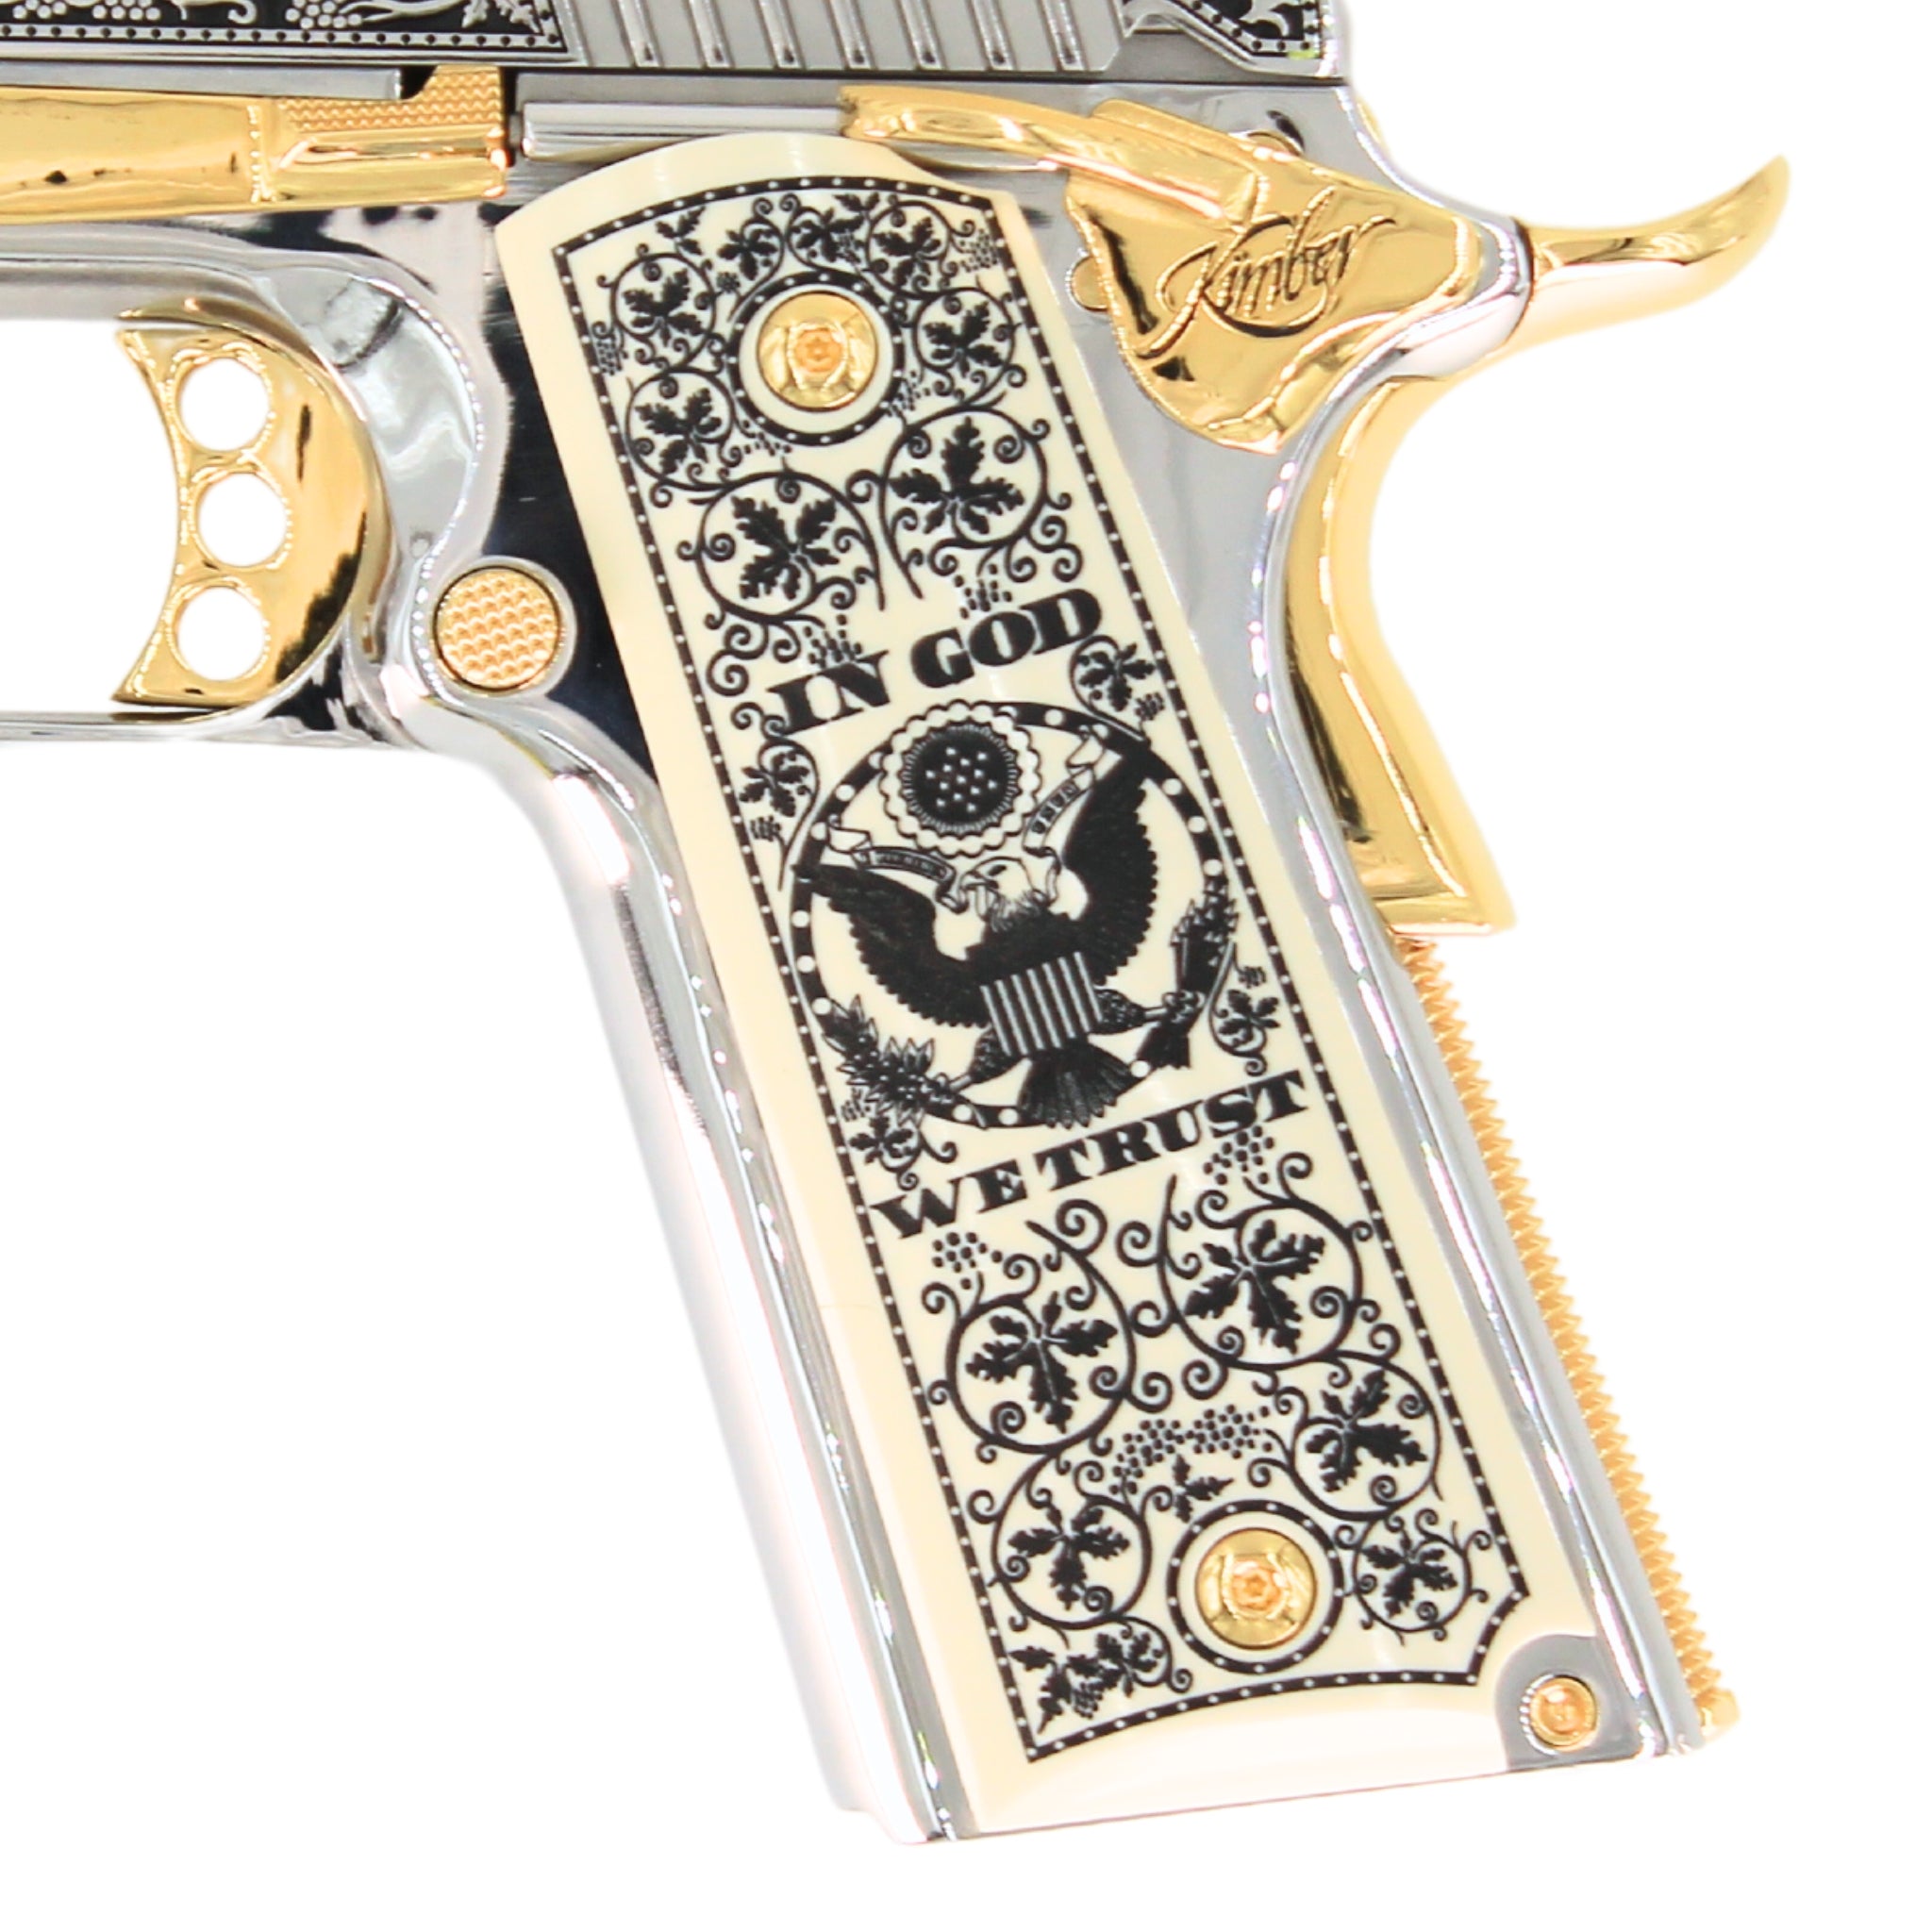 Custom Grips in pearl finish with engraving by Seattle Engraving Center